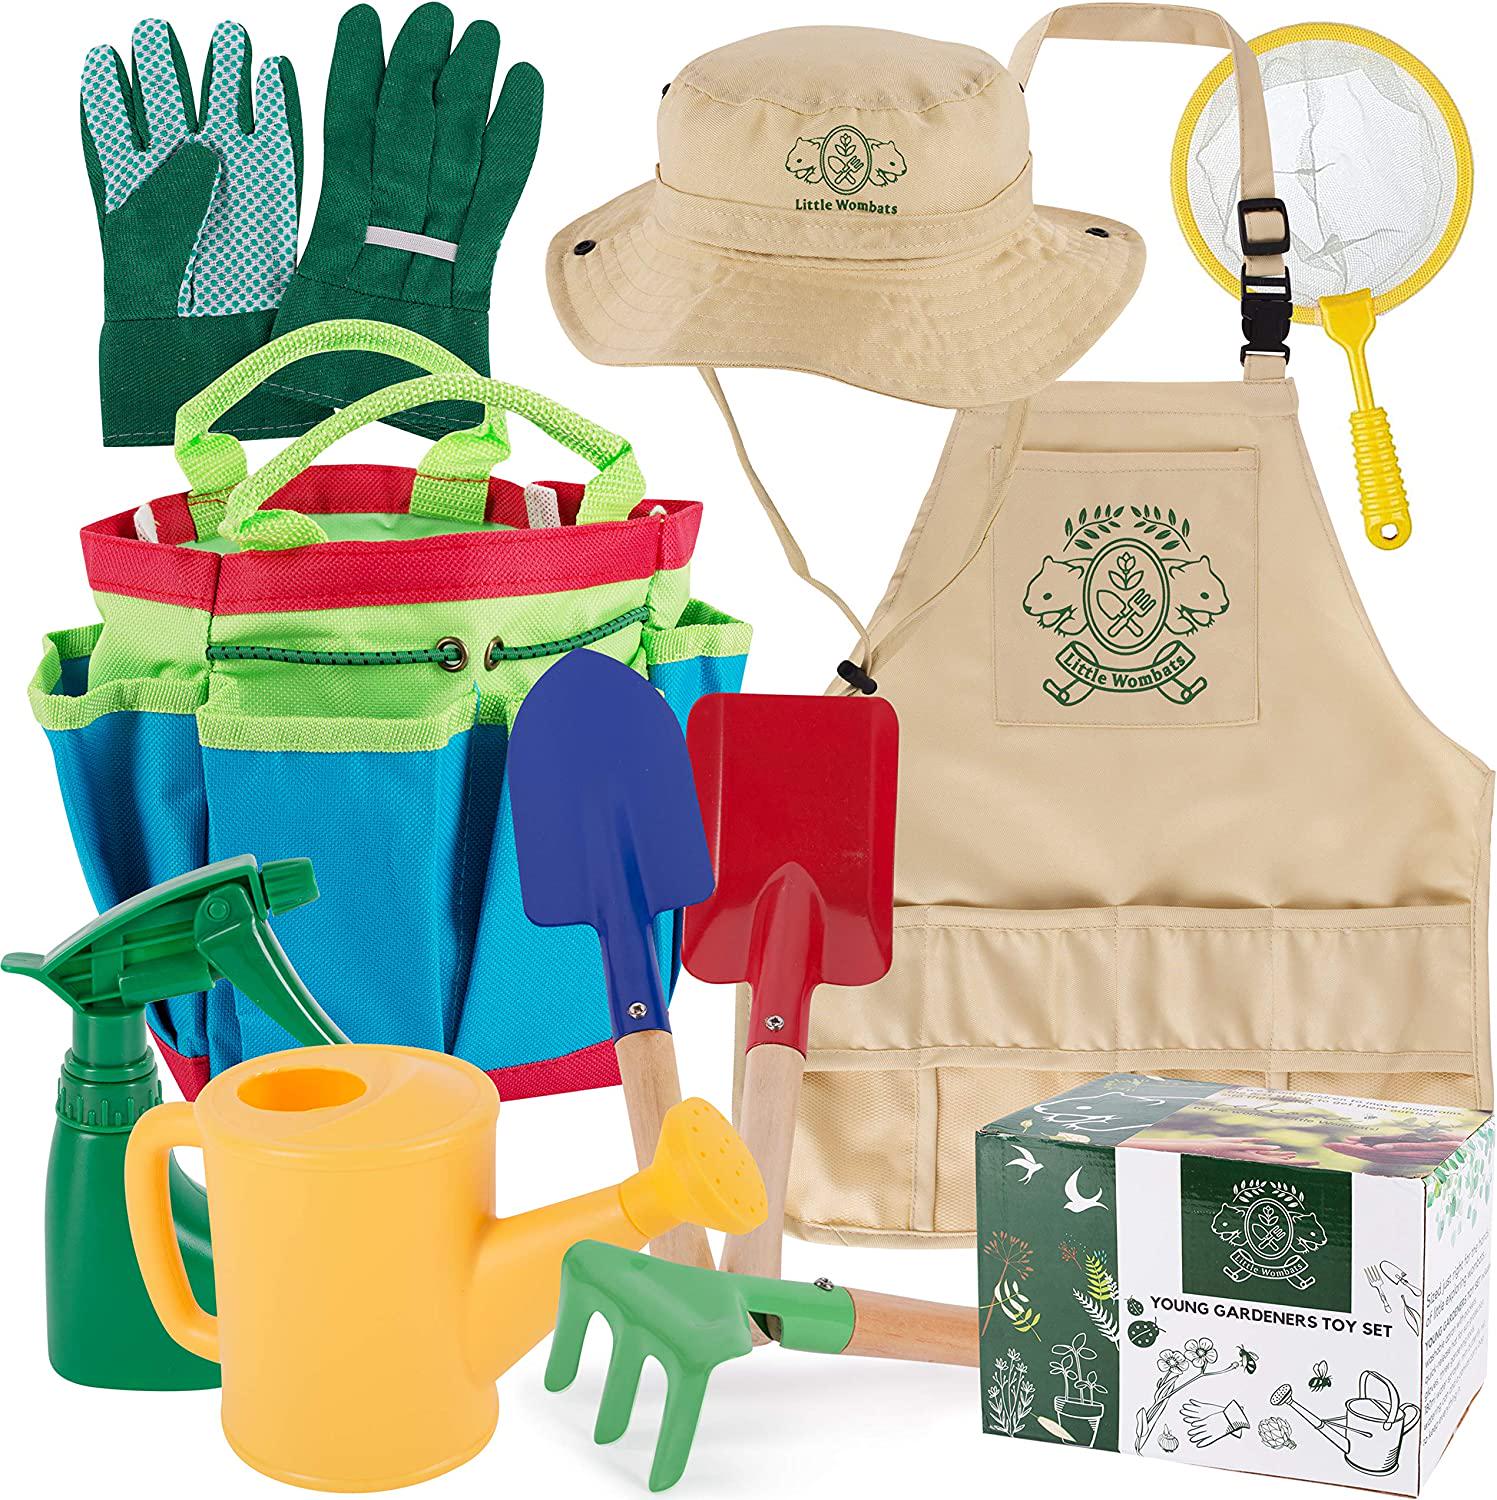 Little Wombats, Little Wombats Kids Gardening Tools, 10 Piece Garden / Backyard Tools, Gloves, Apron, Rake, Hat, Shovel, Watering Can, Spray Bottle, Butterfly Net and Tote - Pretend Play for Boys and Girls Age 3-7